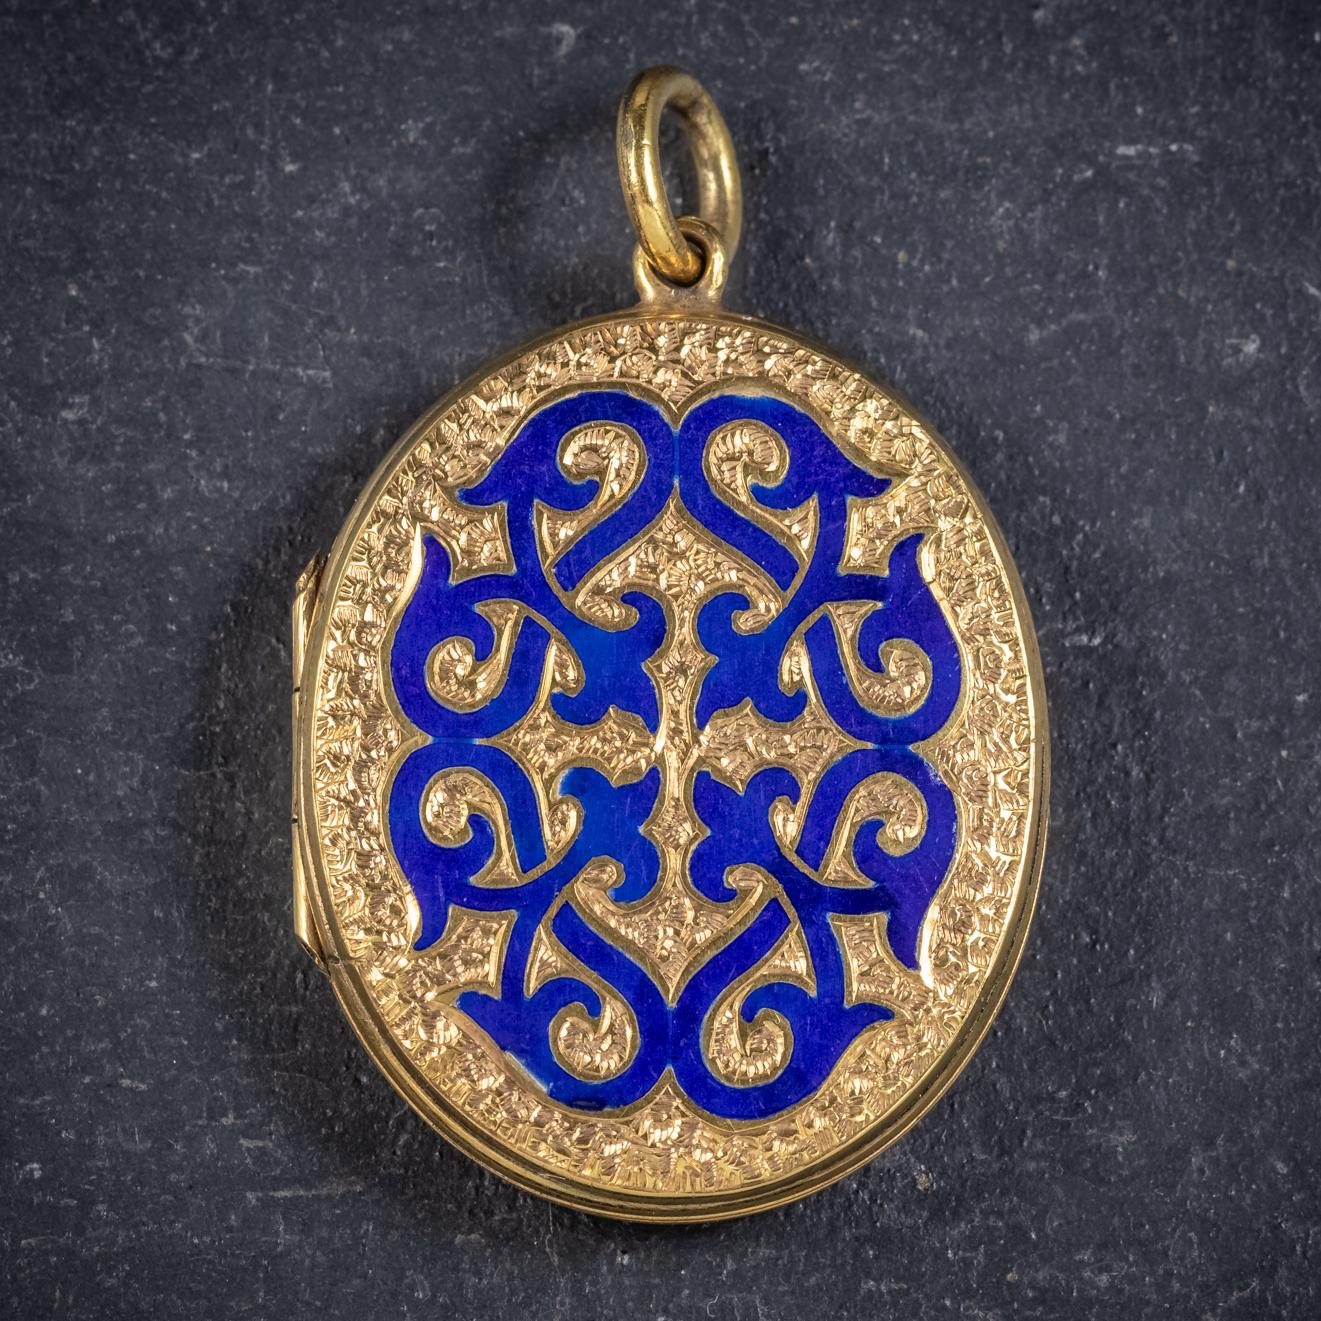 This wonderful antique 18ct Gold Gilt locket is from the Victorian era, Circa 1880. 

The piece boasts a fabulous royal blue Enamel design in the centre with engraved patterning across the front and back. 

Complete with original rims inside with